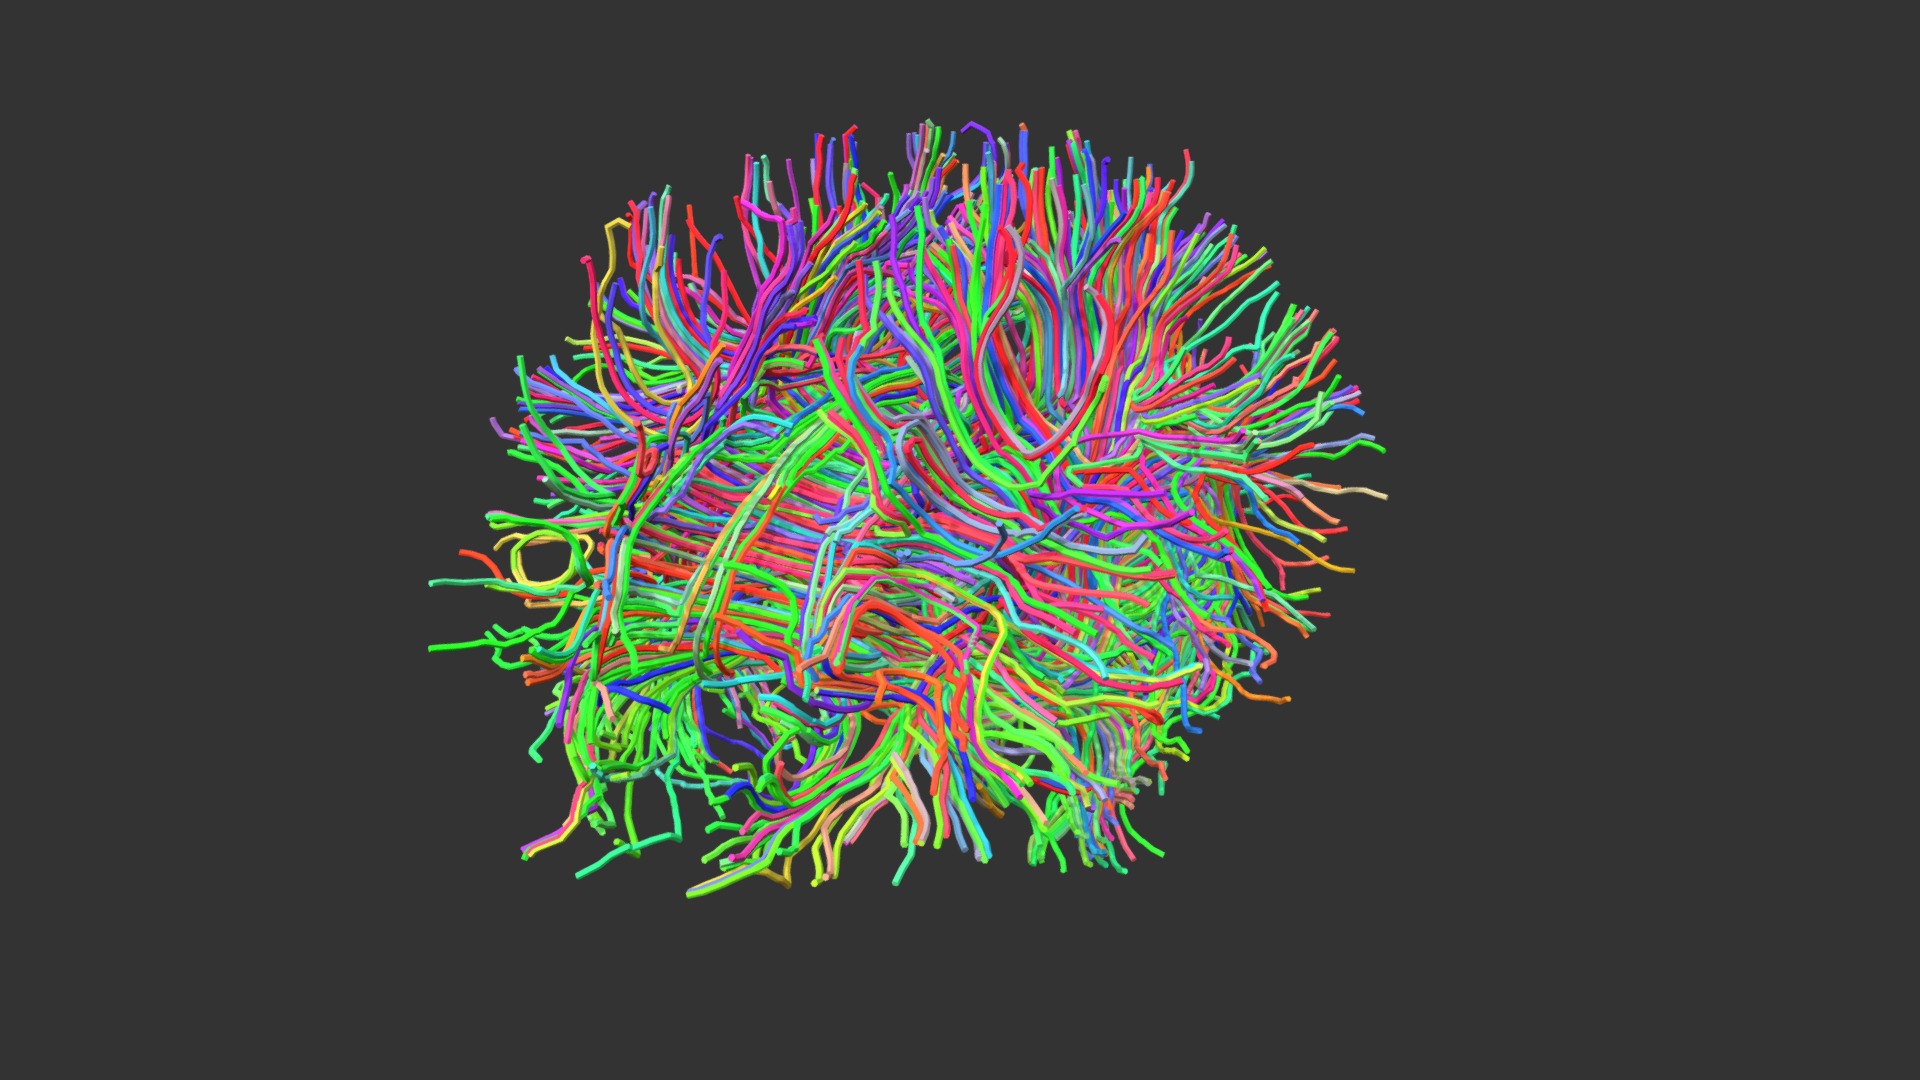 3D model Brain Fibre Tracts from an fMRI scan - This is a 3D model of the Brain Fibre Tracts from an fMRI scan. The 3D model is about a colorful design on a black background.